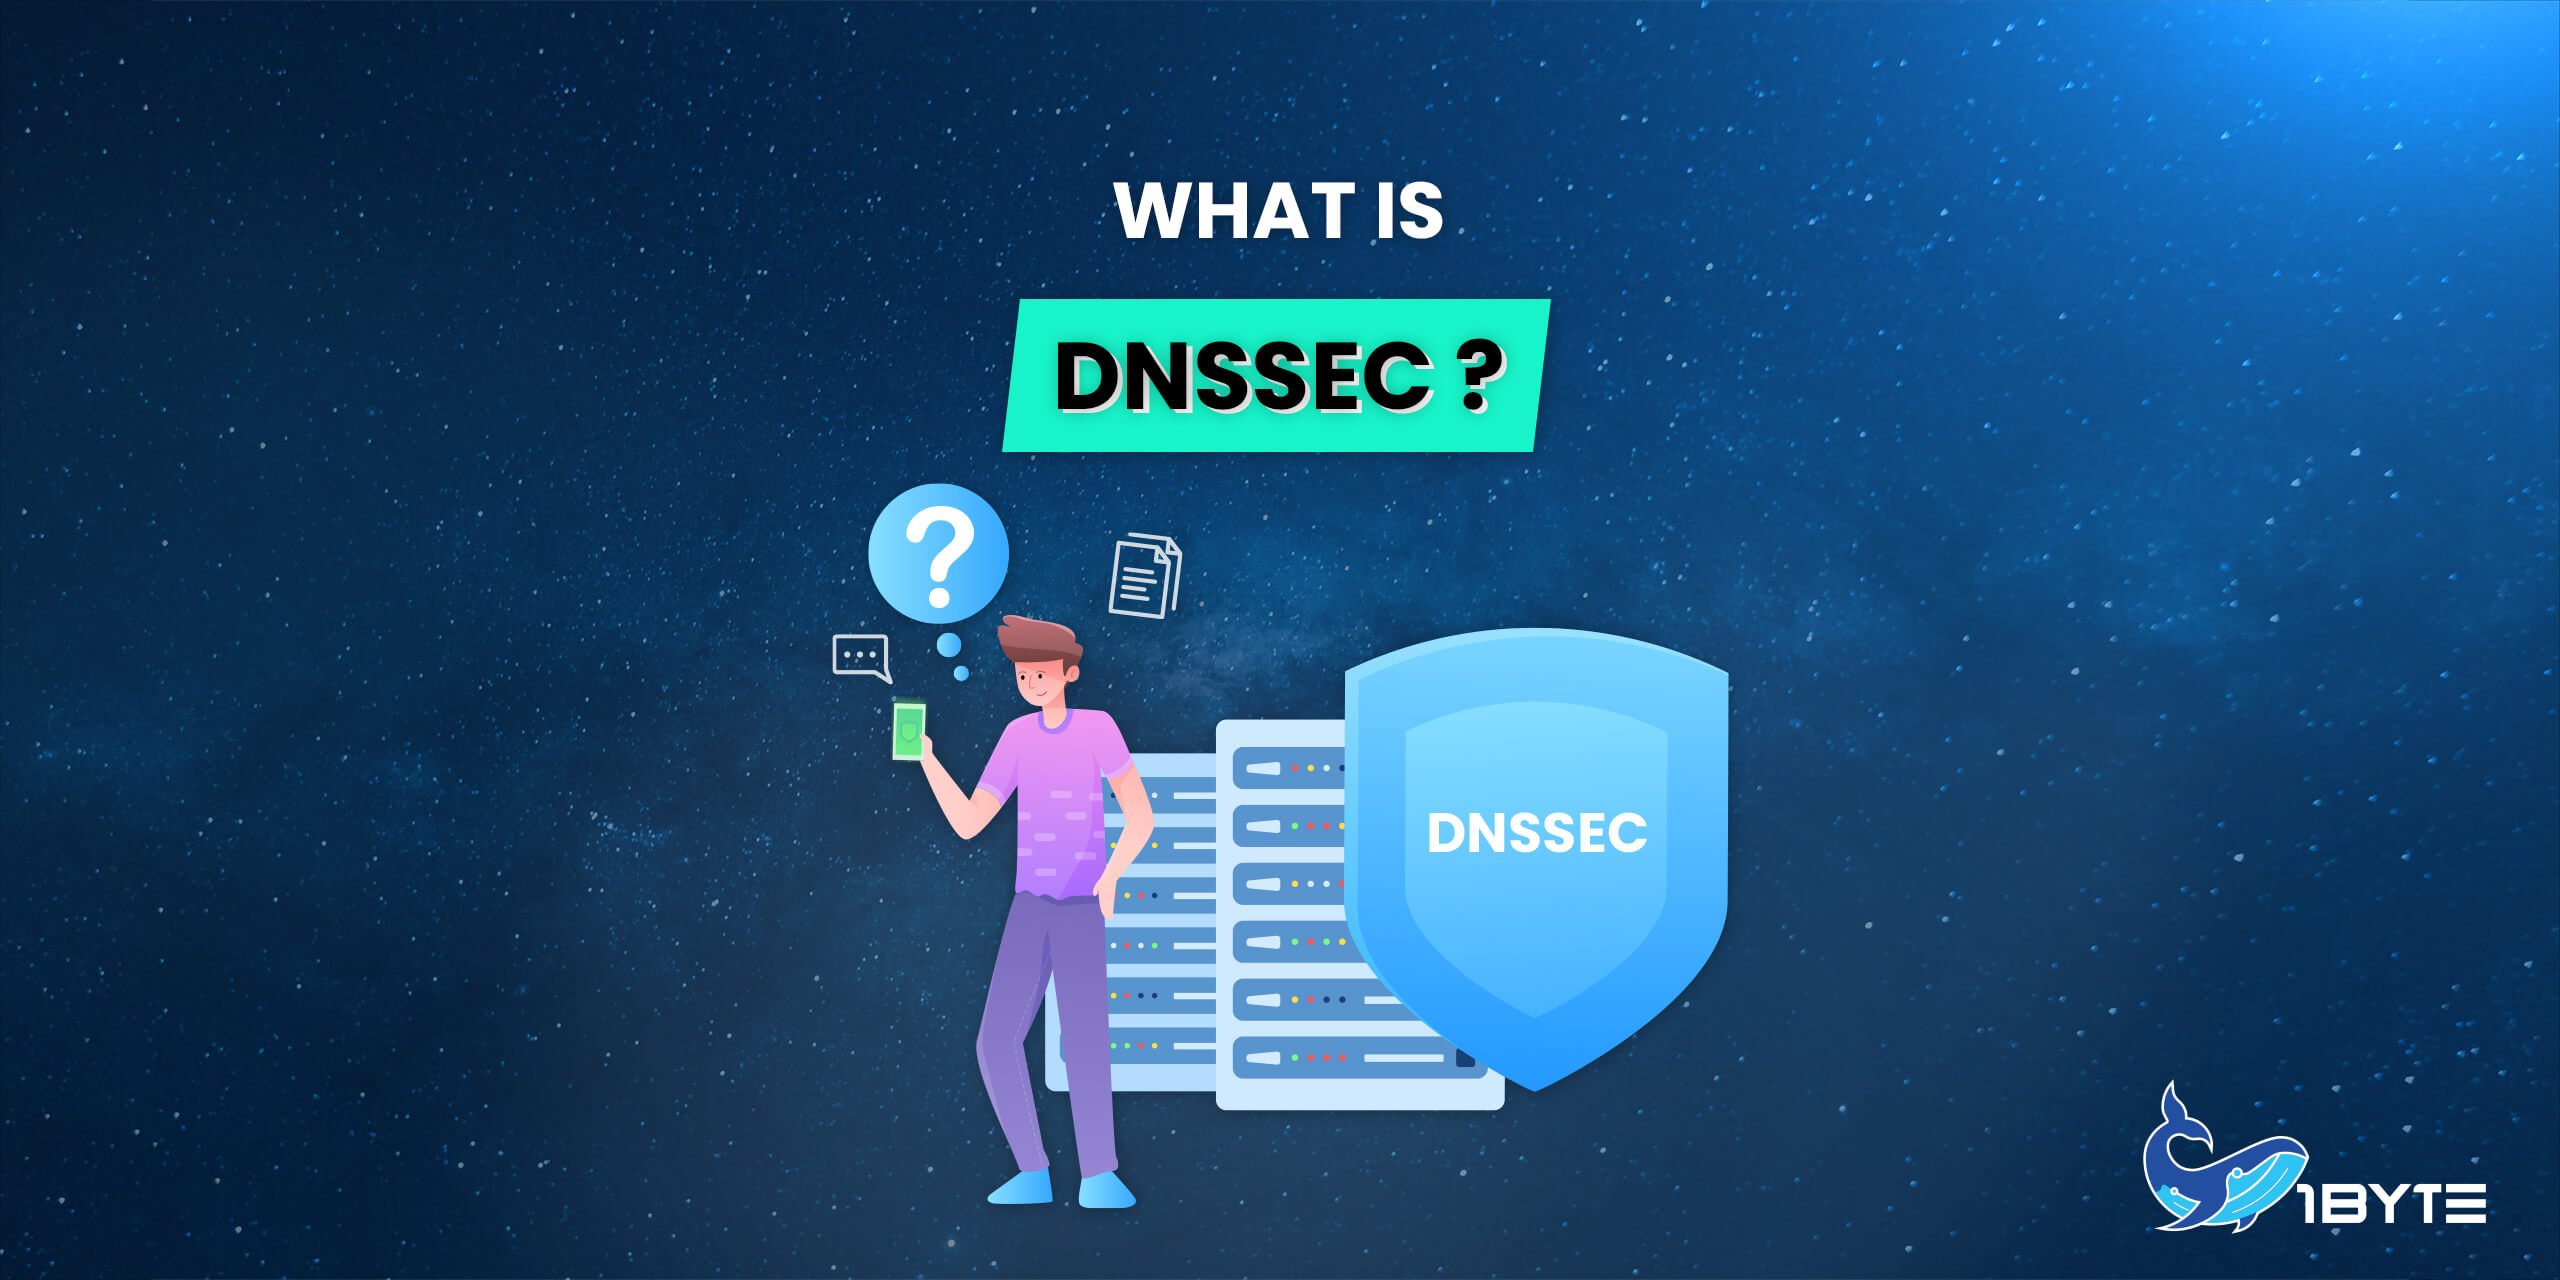 What is DNSSEC?